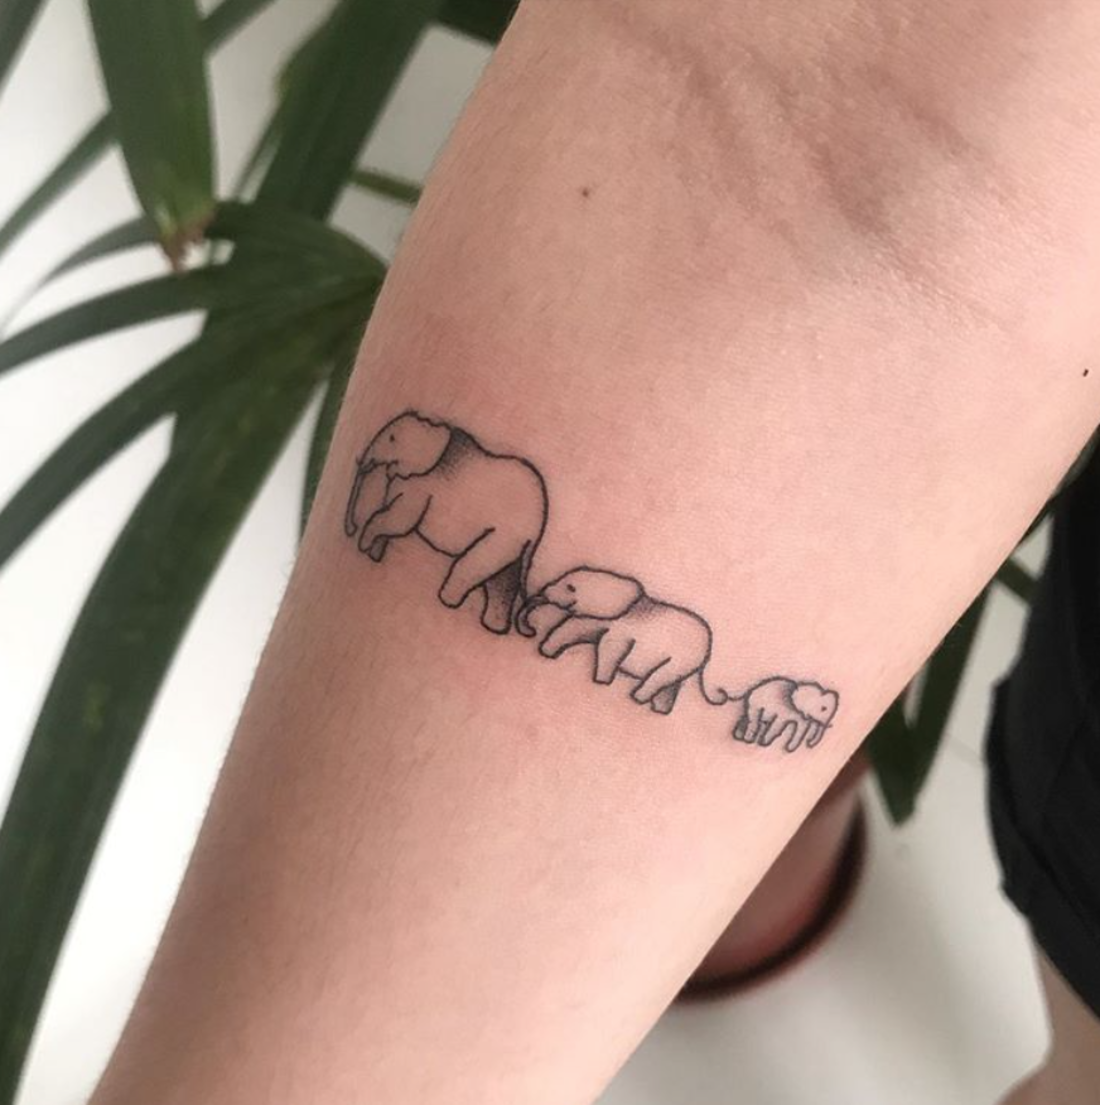 Lafeenoire on Twitter After just one day my adoption tattoo is already  brighterI love it love it love it adoptiontattoo  httpstcoZCAA69j1SH  Twitter